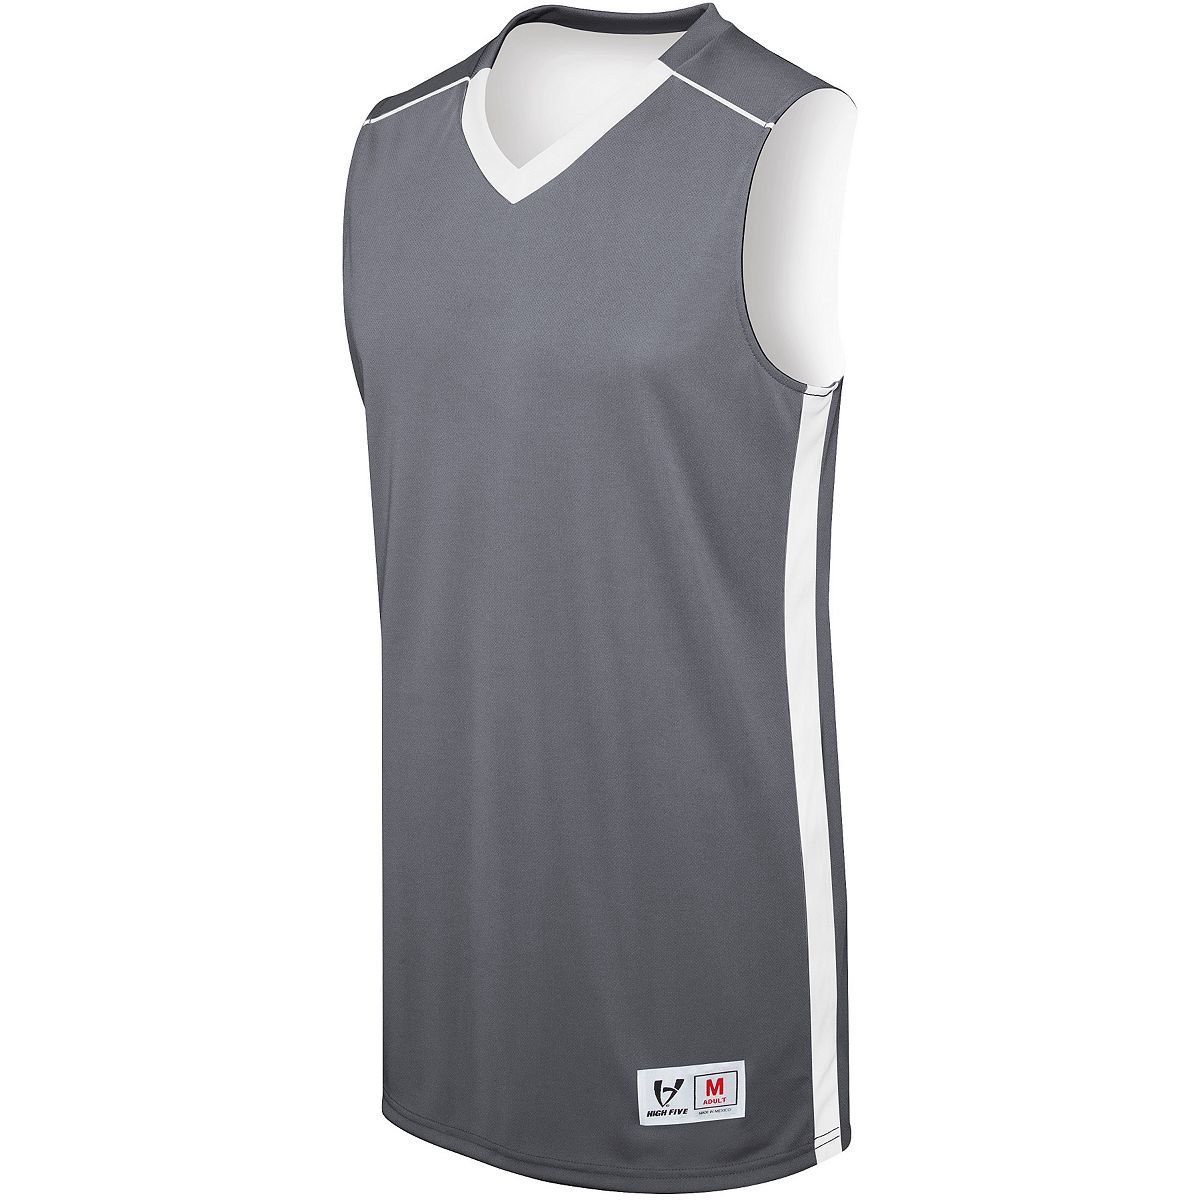 Augusta Sportswear Adult Competition Reversible Jersey in Graphite/White  -Part of the Adult, Adult-Jersey, Augusta-Products, Basketball, Shirts, All-Sports, All-Sports-1 product lines at KanaleyCreations.com